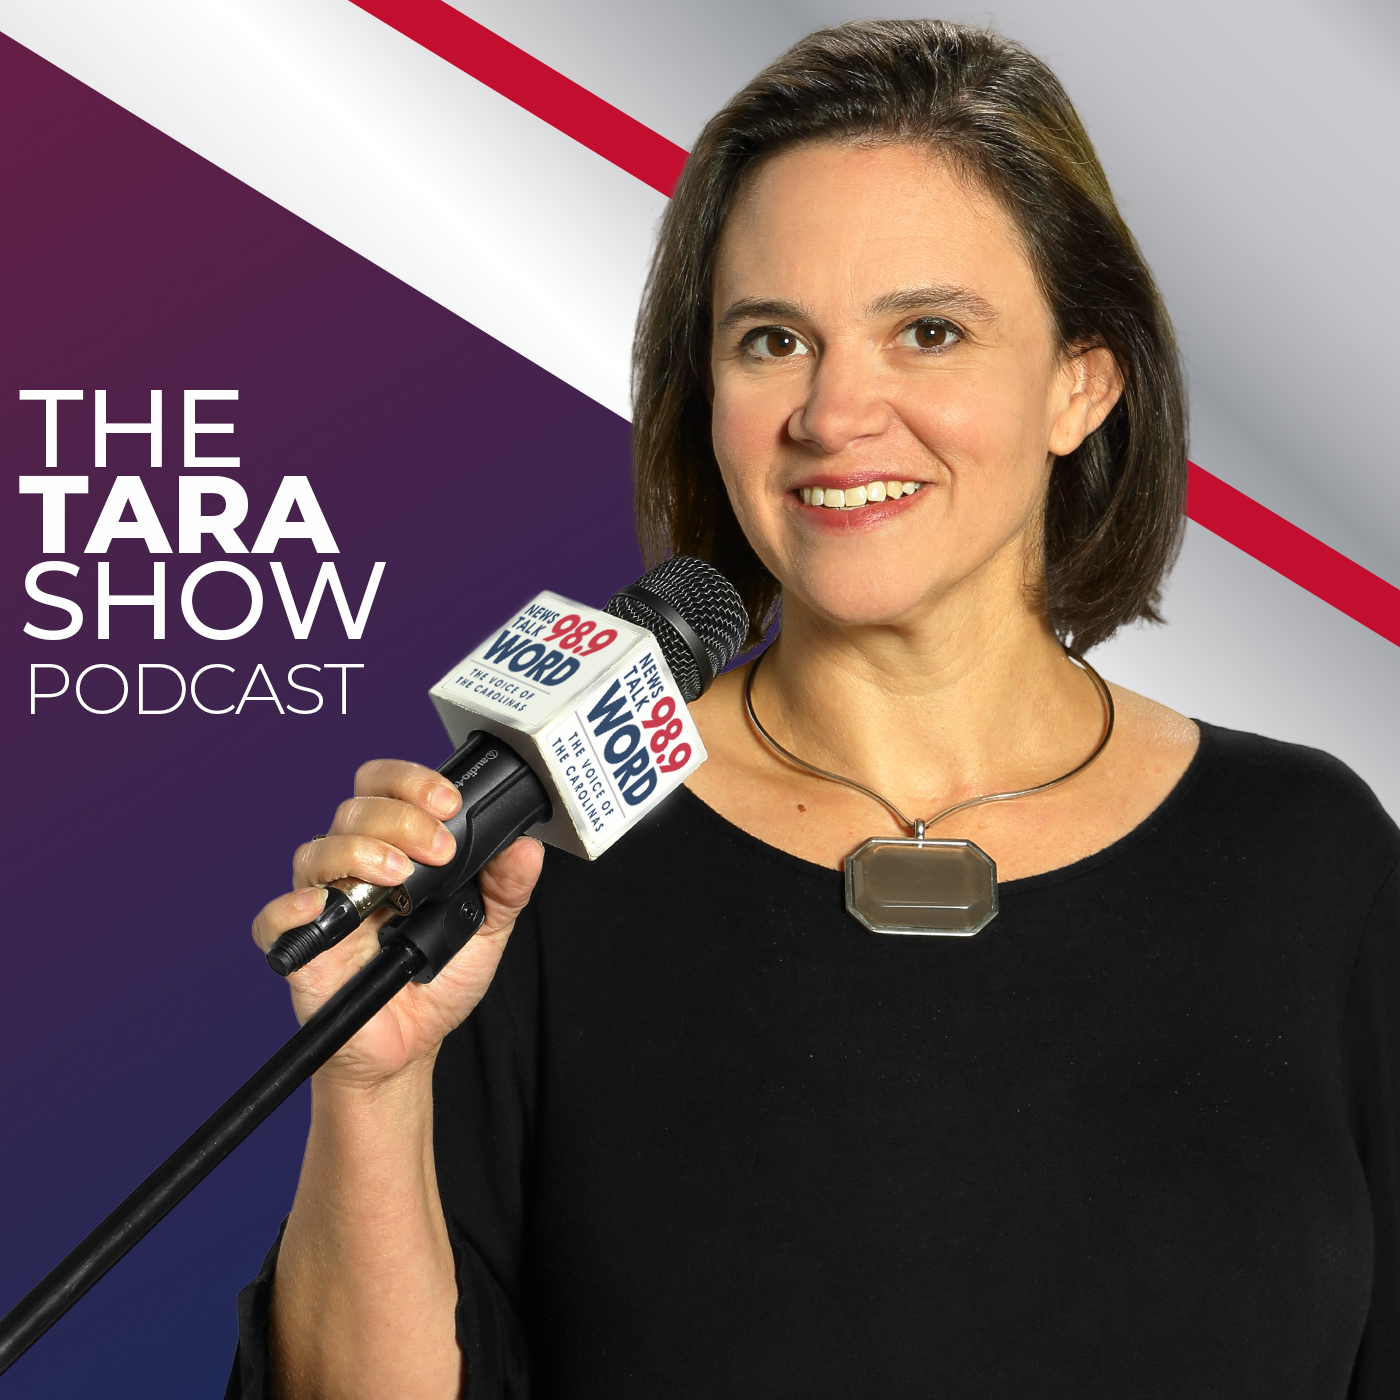 Hour 1: The Tara Show - “The SC Port Crisis” “Deadly Force in Mar A Lago Raid Authorized” “As The Jury Decides Trump’s Fate” “Where is the Crime?”